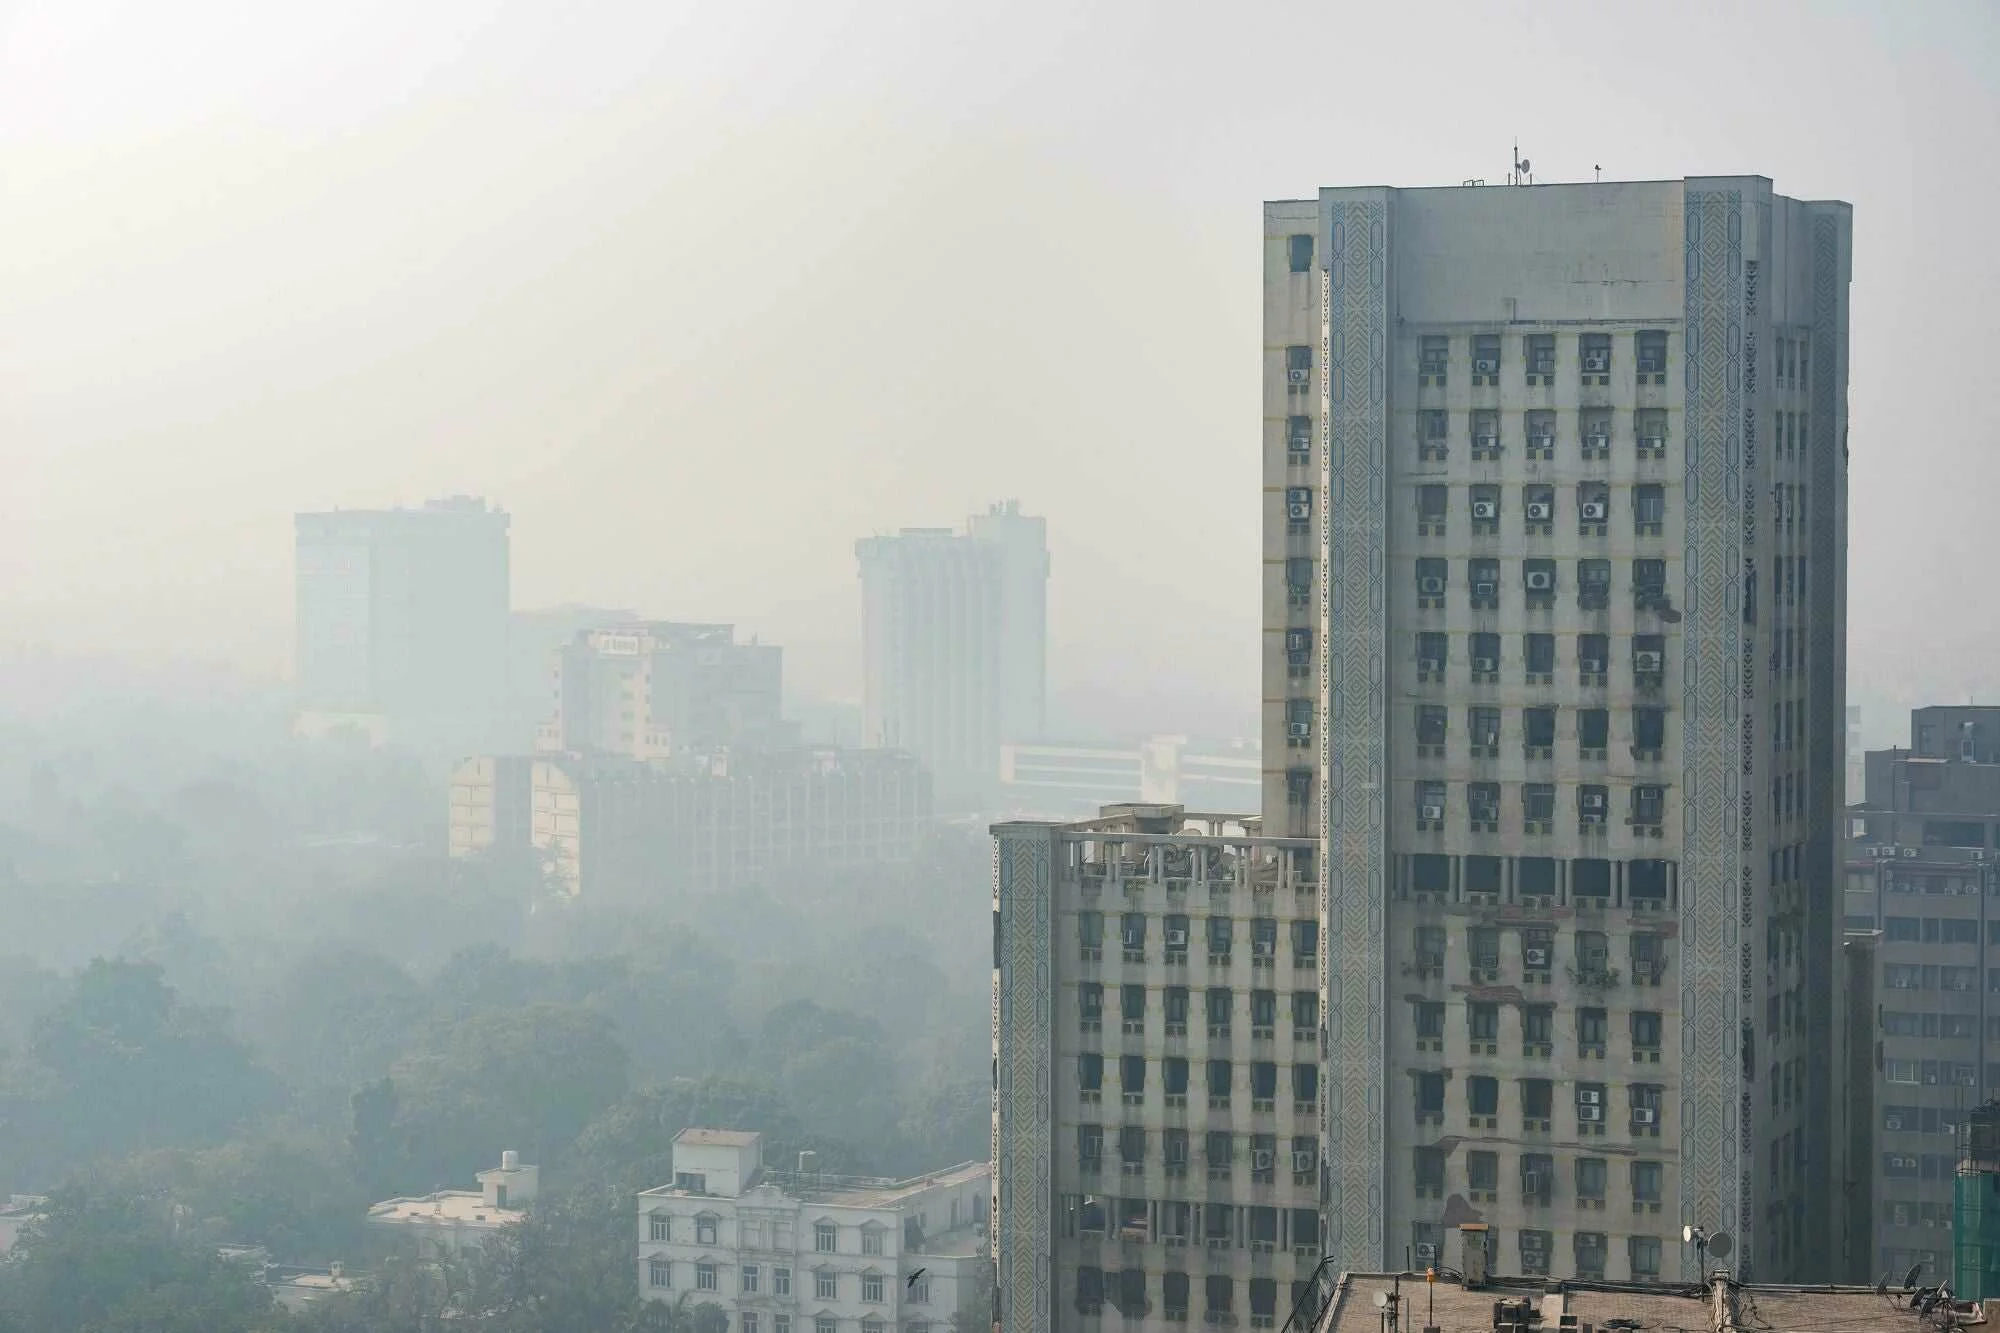 Why Air Quality Matters Even More in India post COVID-19